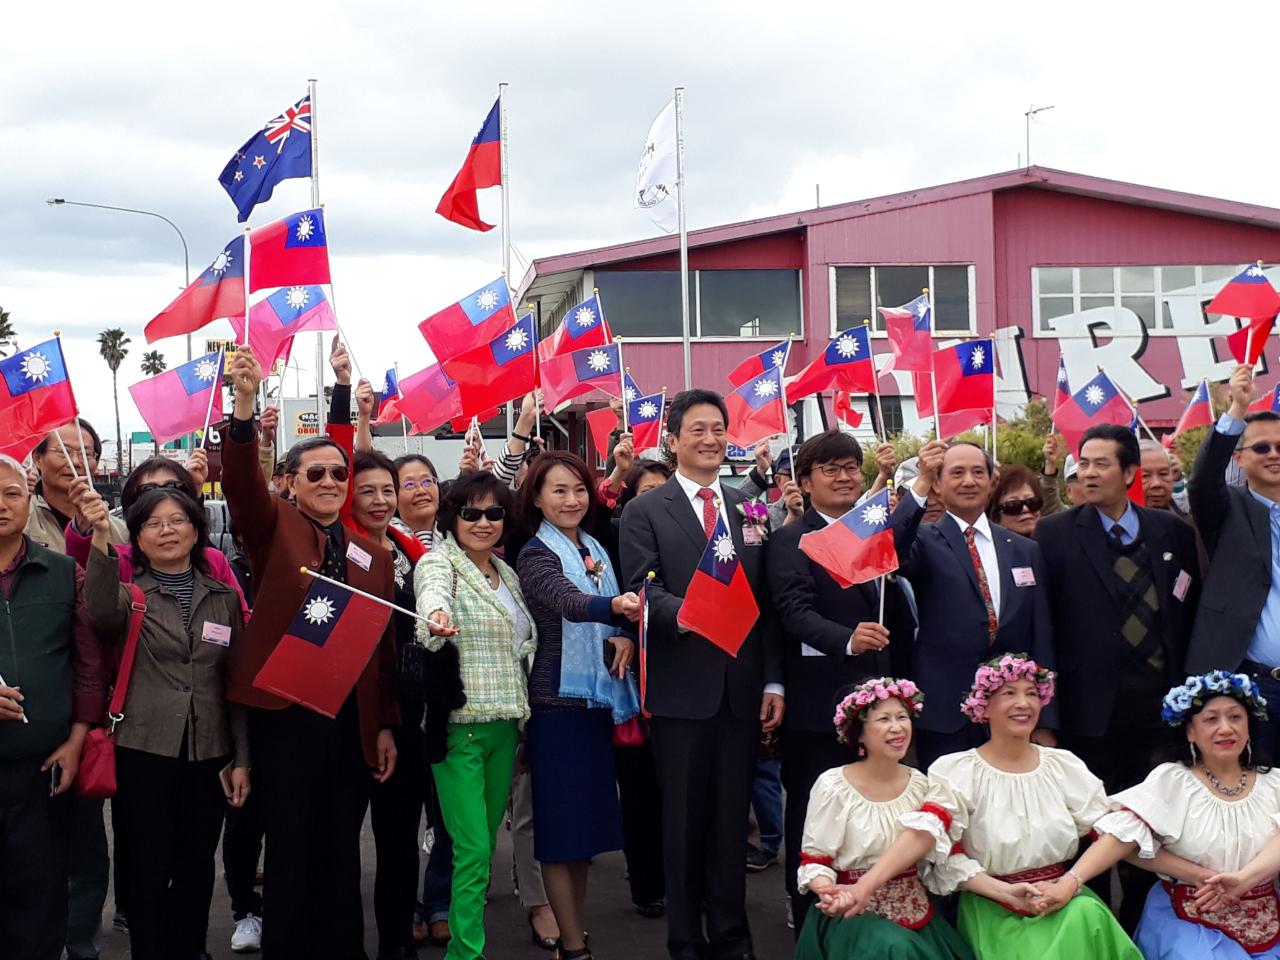 Group photo with all the fellow citizens of Republic of China living in New Zealand.